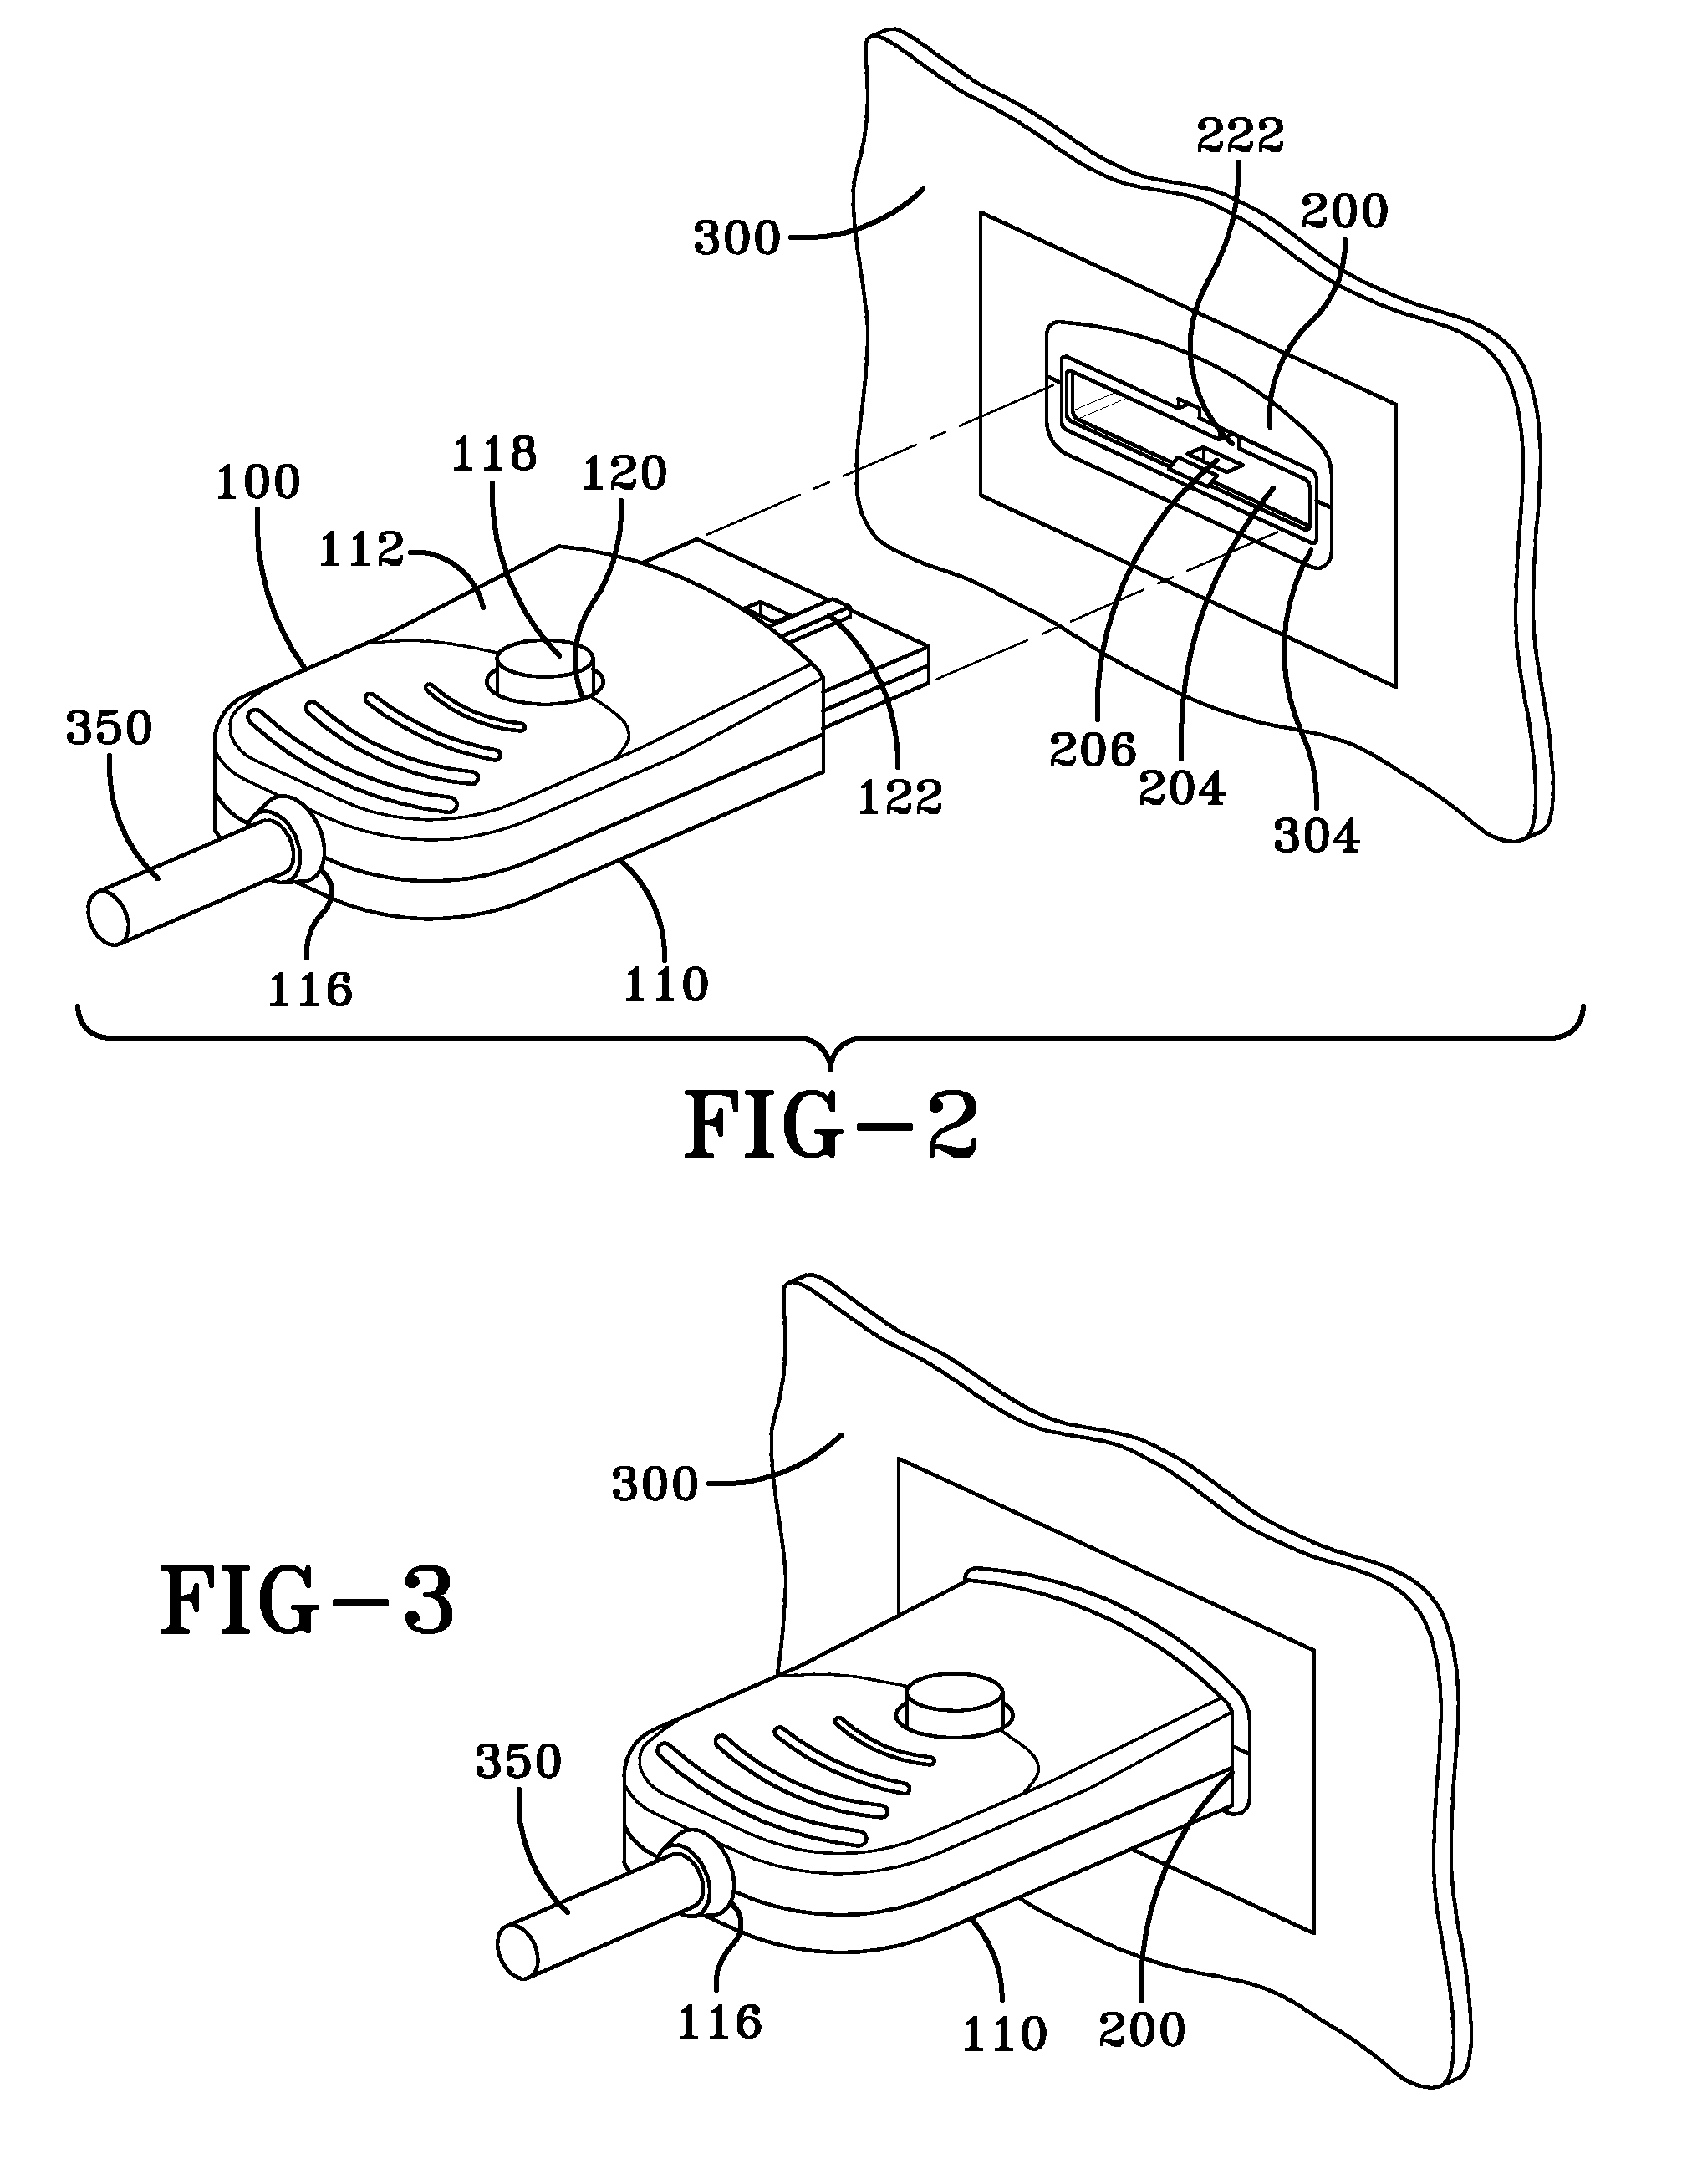 Plug connector for use with a receptacle